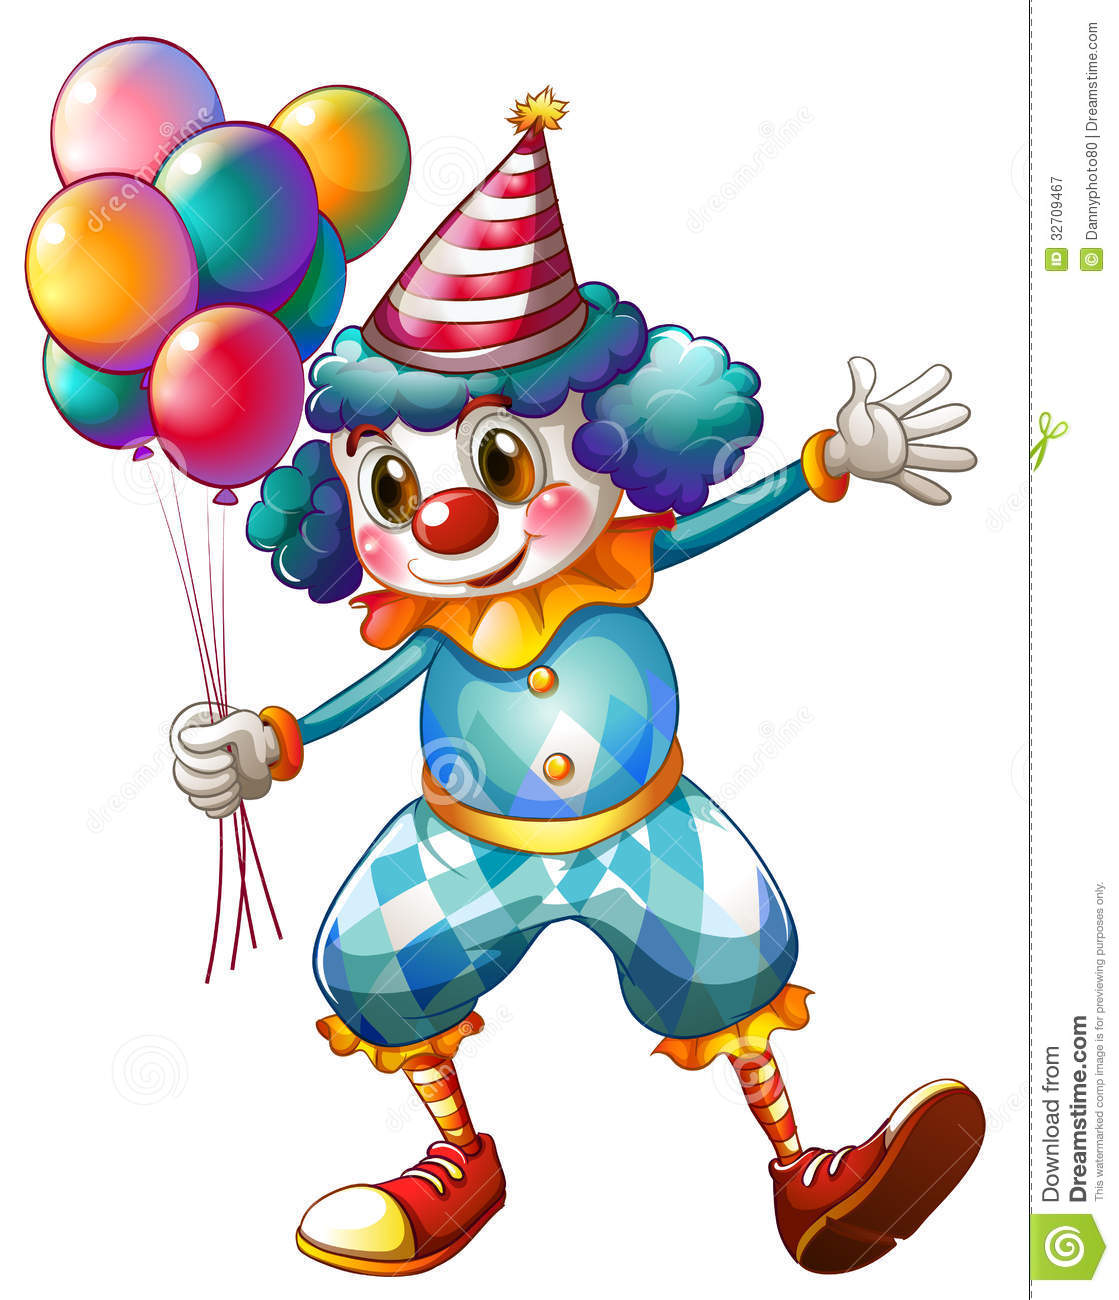 Clown Holding Balloons Royalty Free Stock Photography   Image    